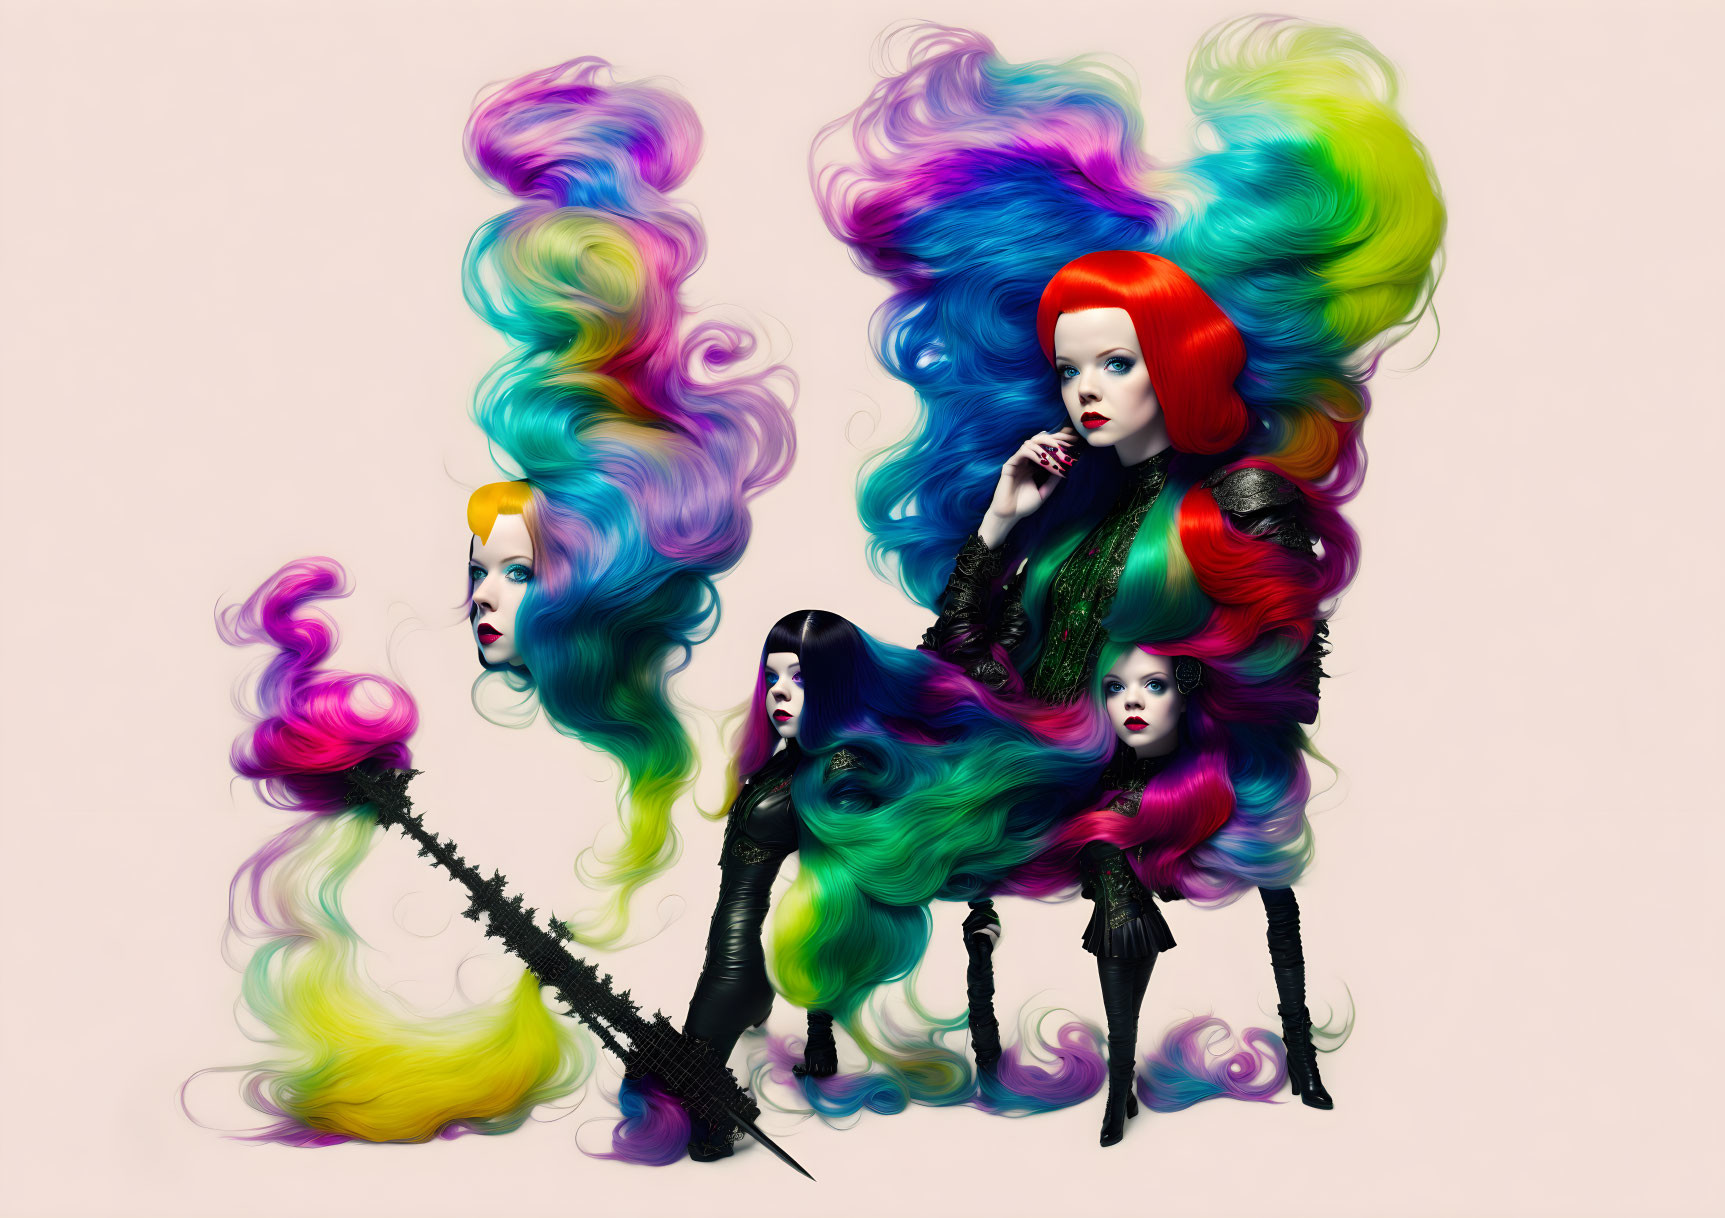 Four female figures with flowing hair merging in surrealistic image.